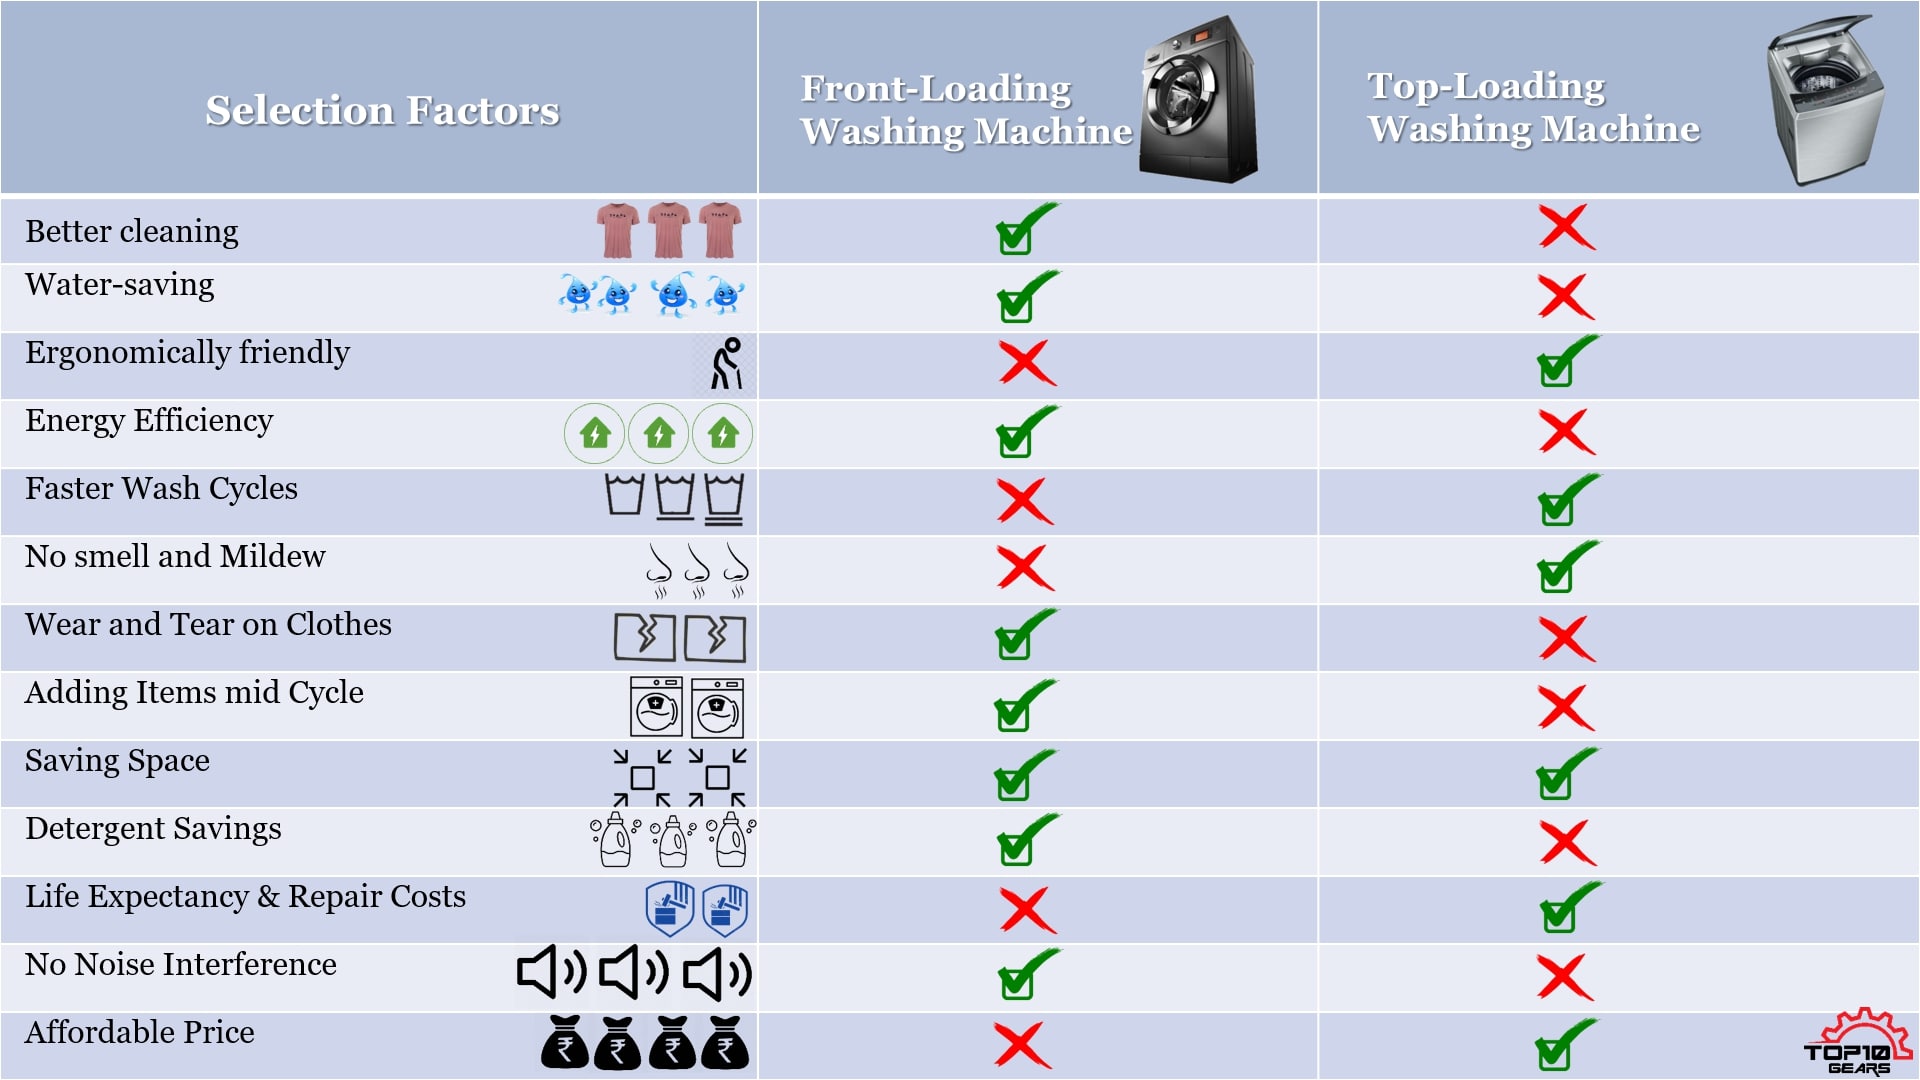 Difference between top loading and front loading washing machines